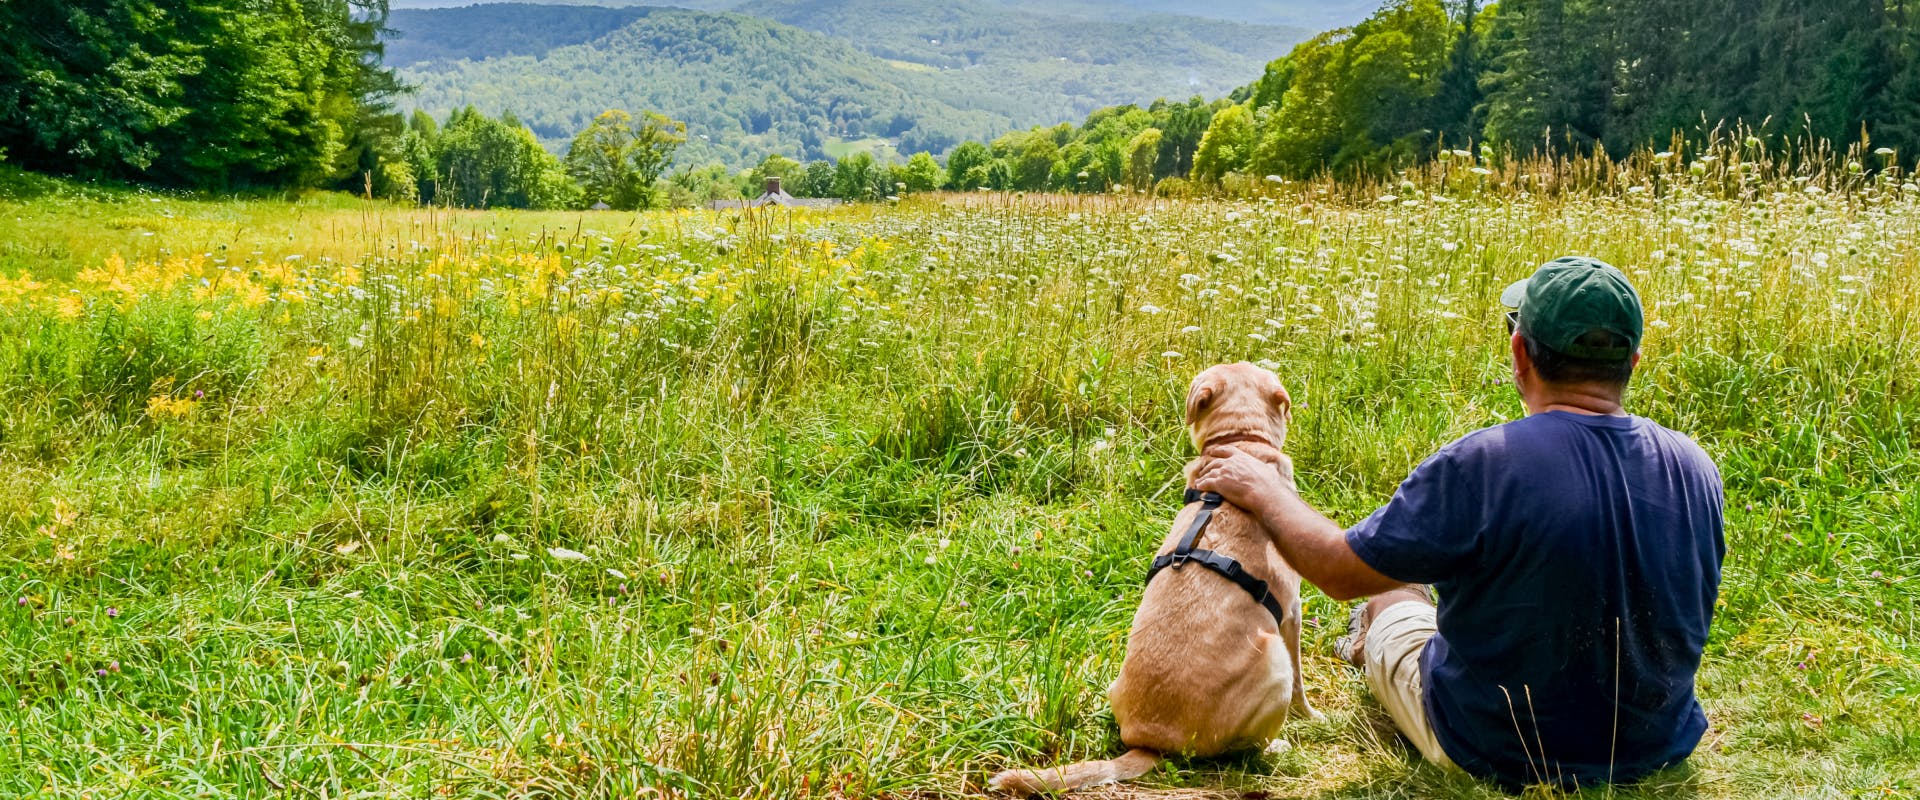 dog and man sat in a field looking at a hilly view